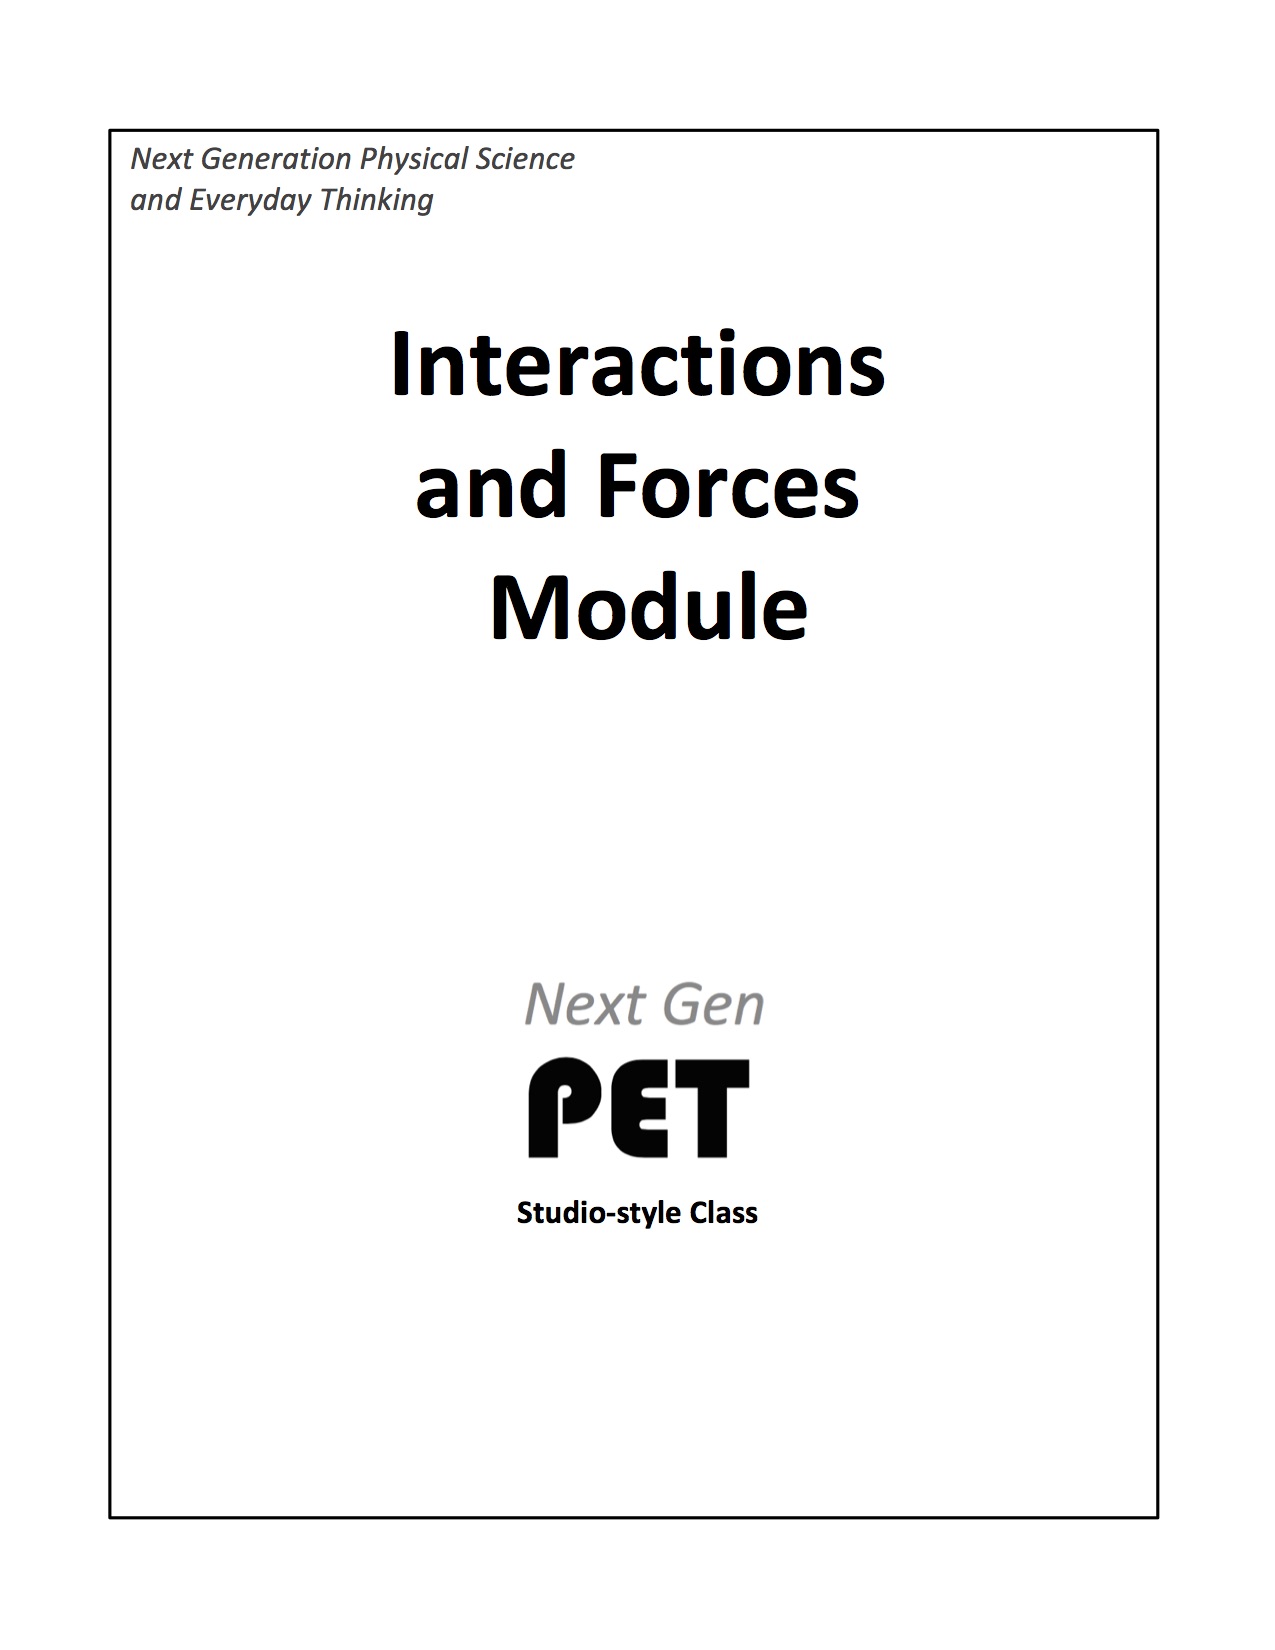 Module IF: Interactions and Forces